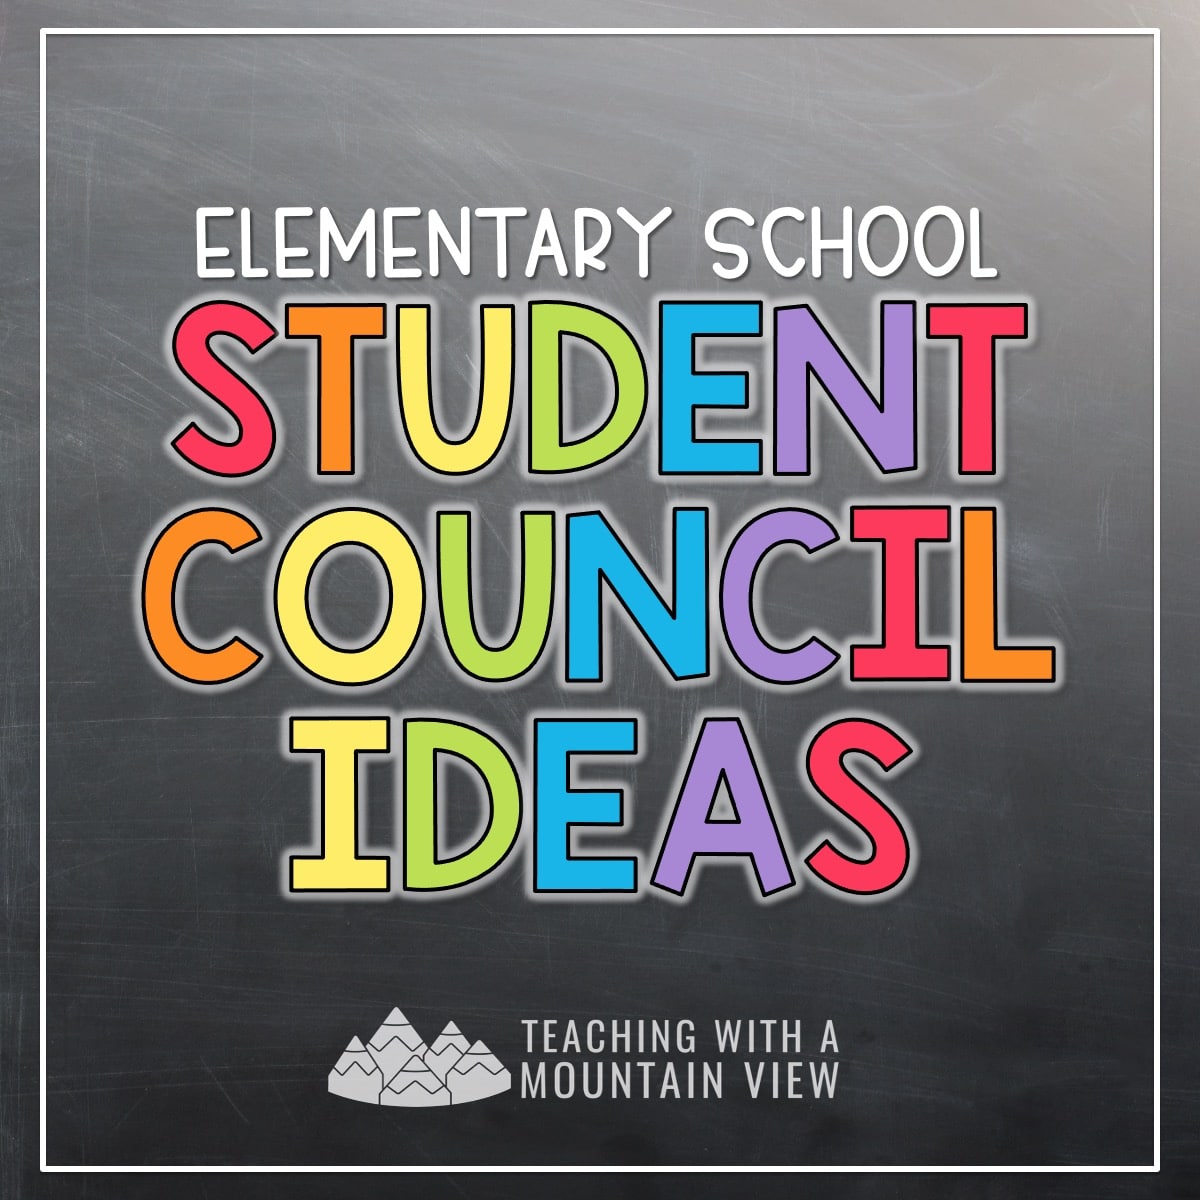 These student council ideas provide a platform for students to develop important life skills while making a positive impact on their school community.